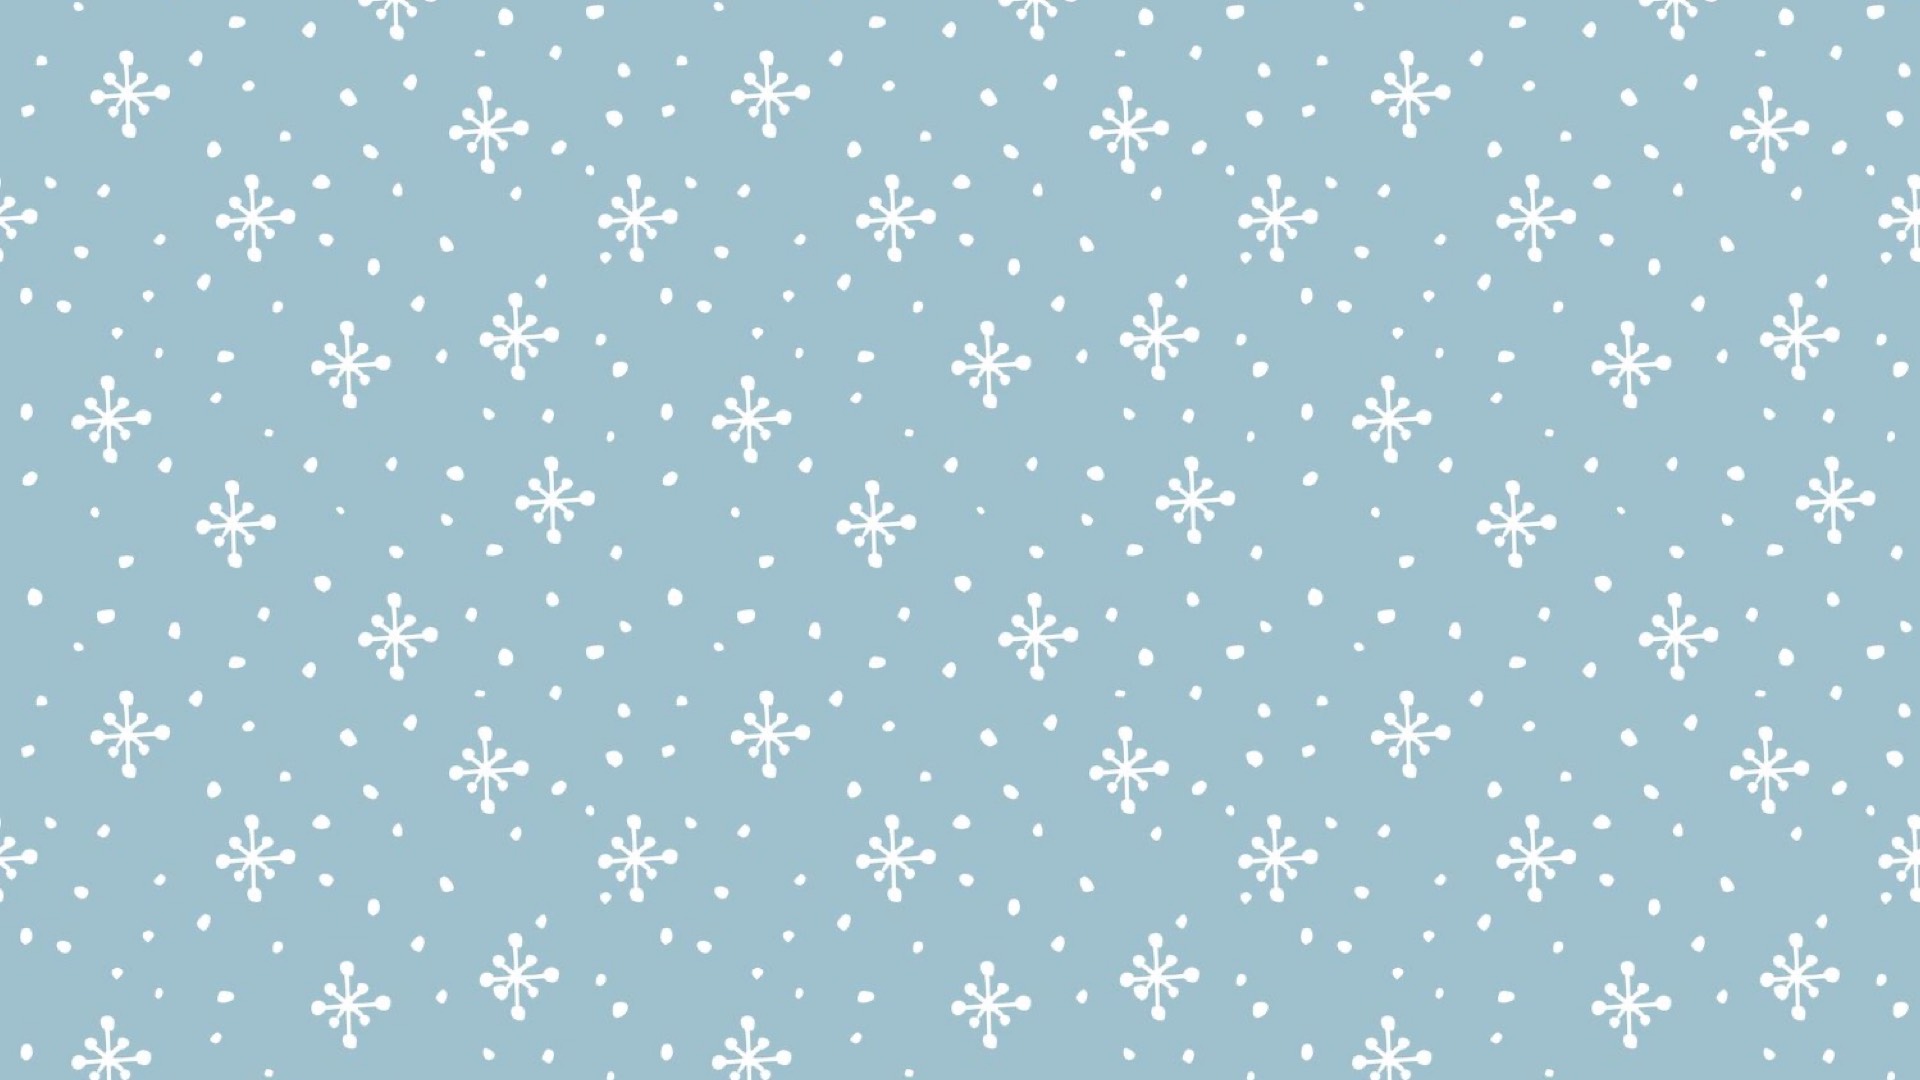 A Blue Background With White Snowflakes On It Zoom Backgrounds Template